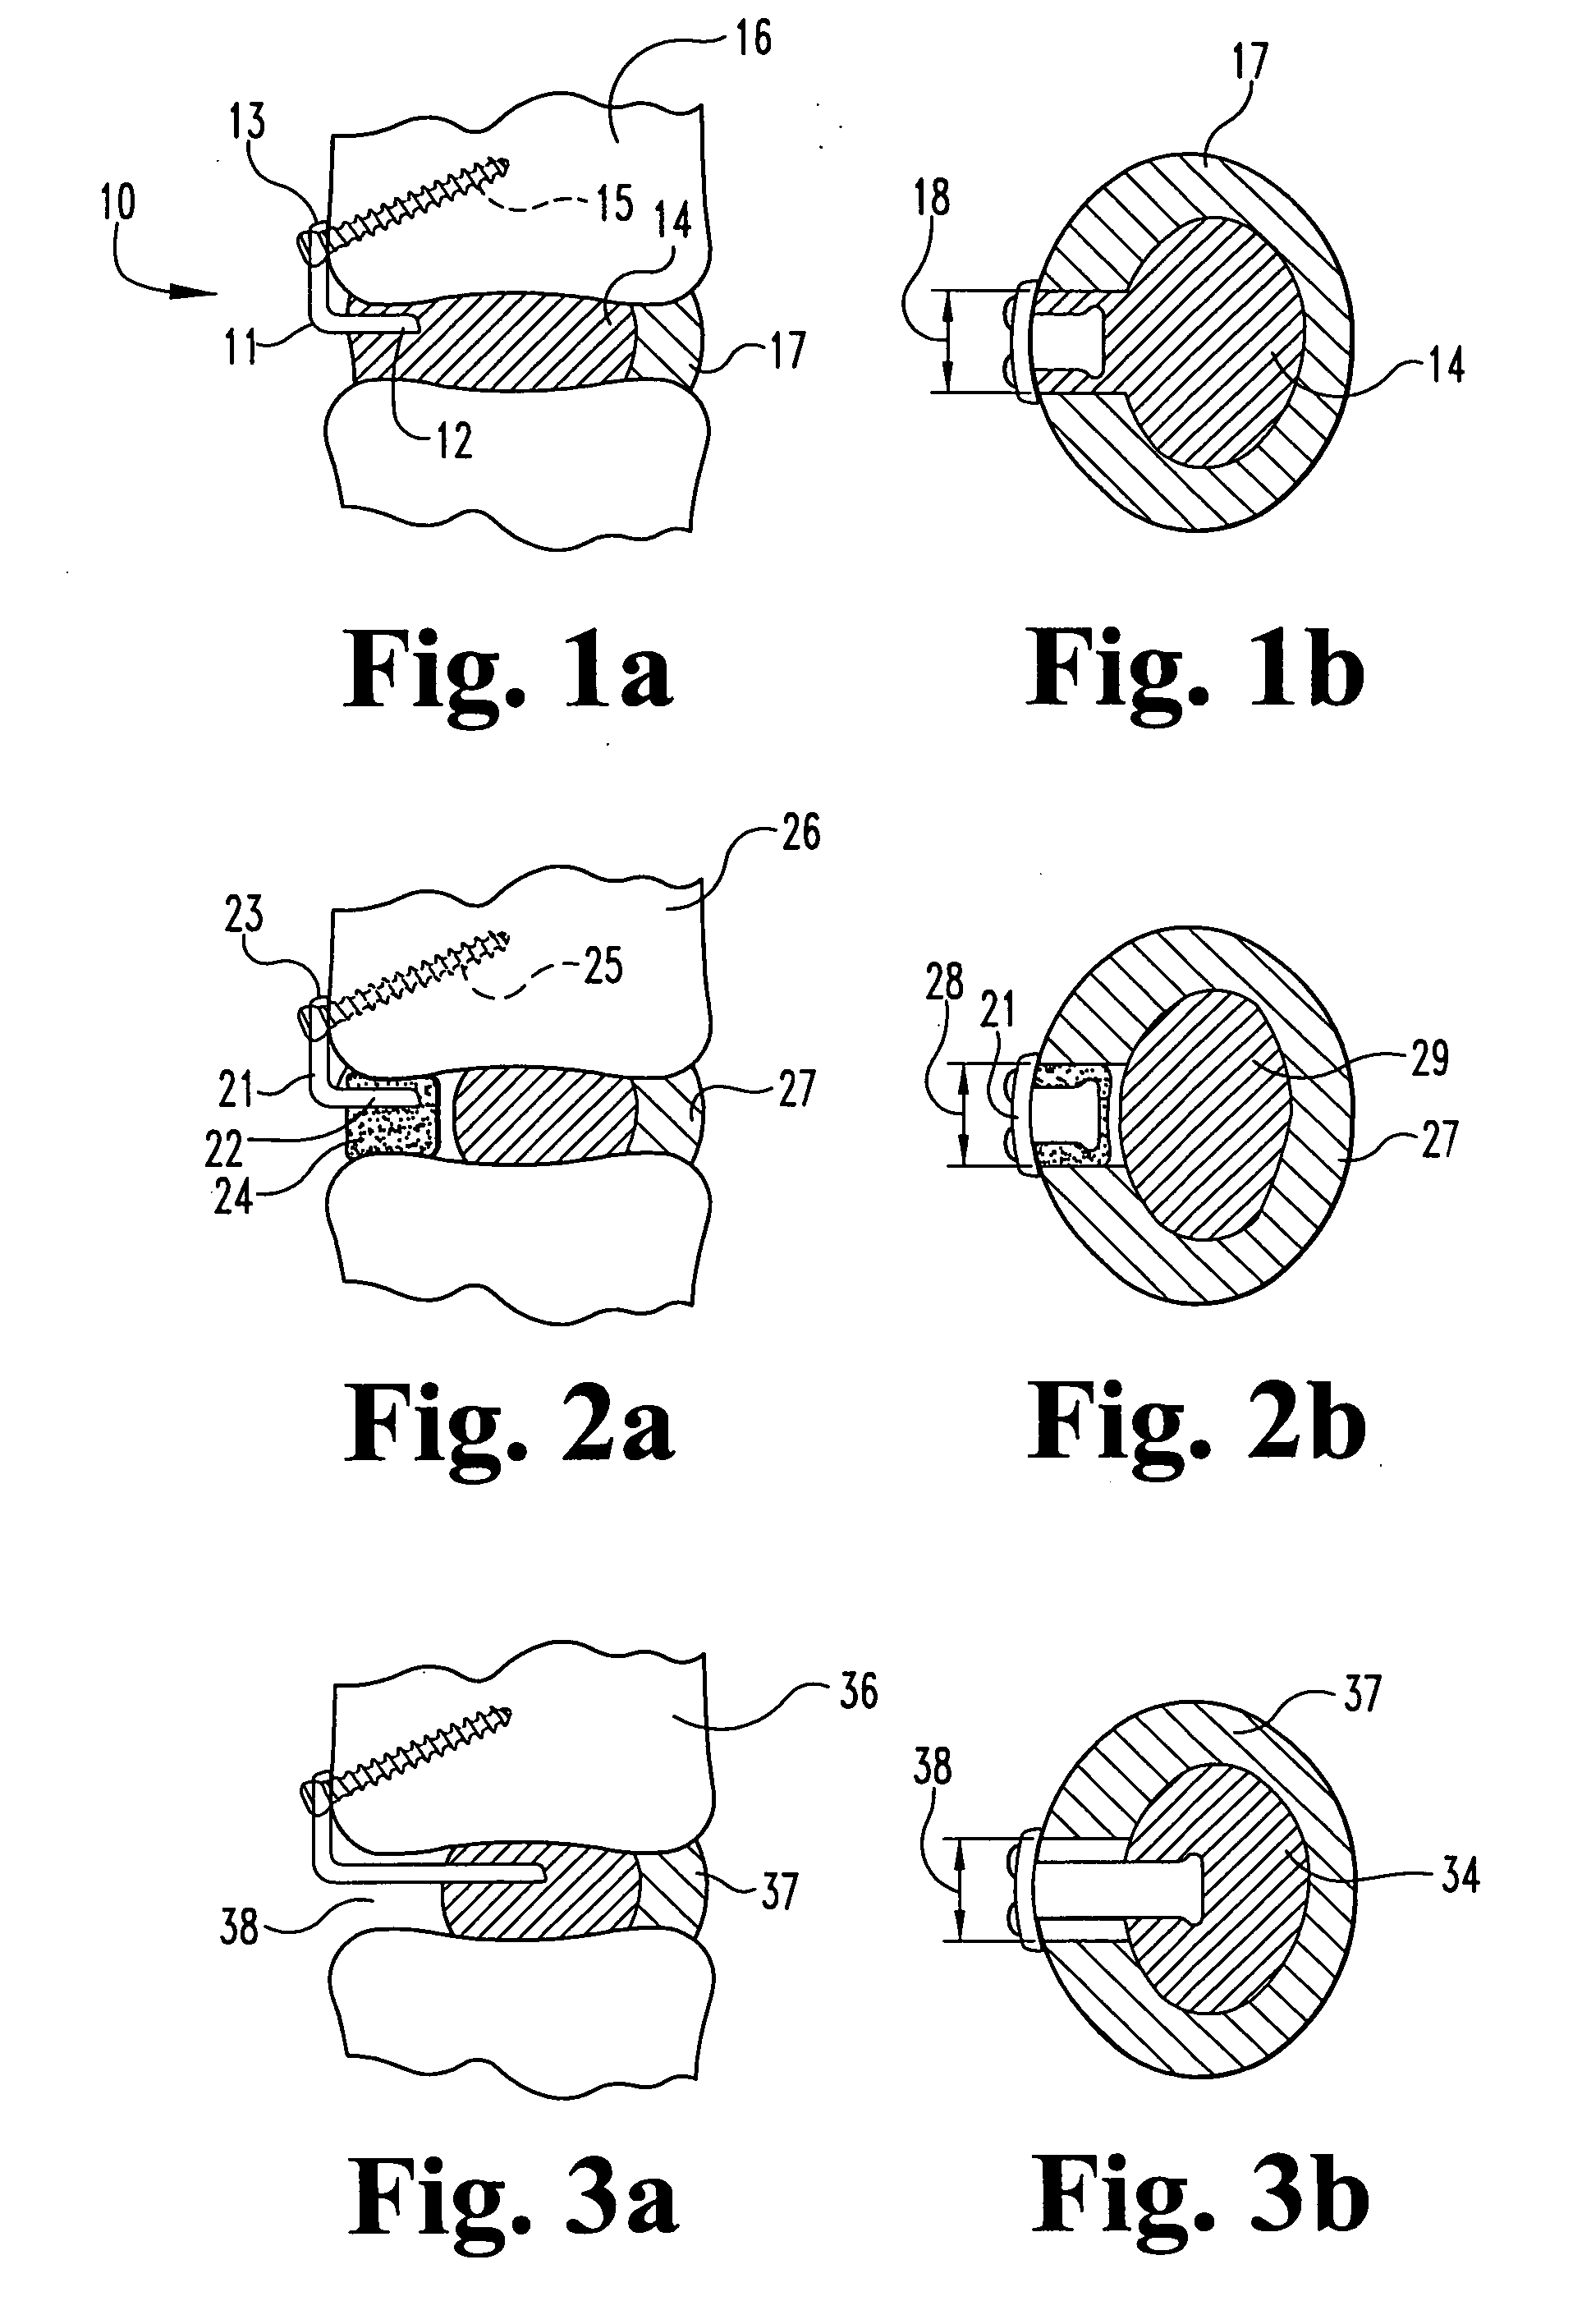 System and method for blocking and/or retaining a prosthetic spinal implant